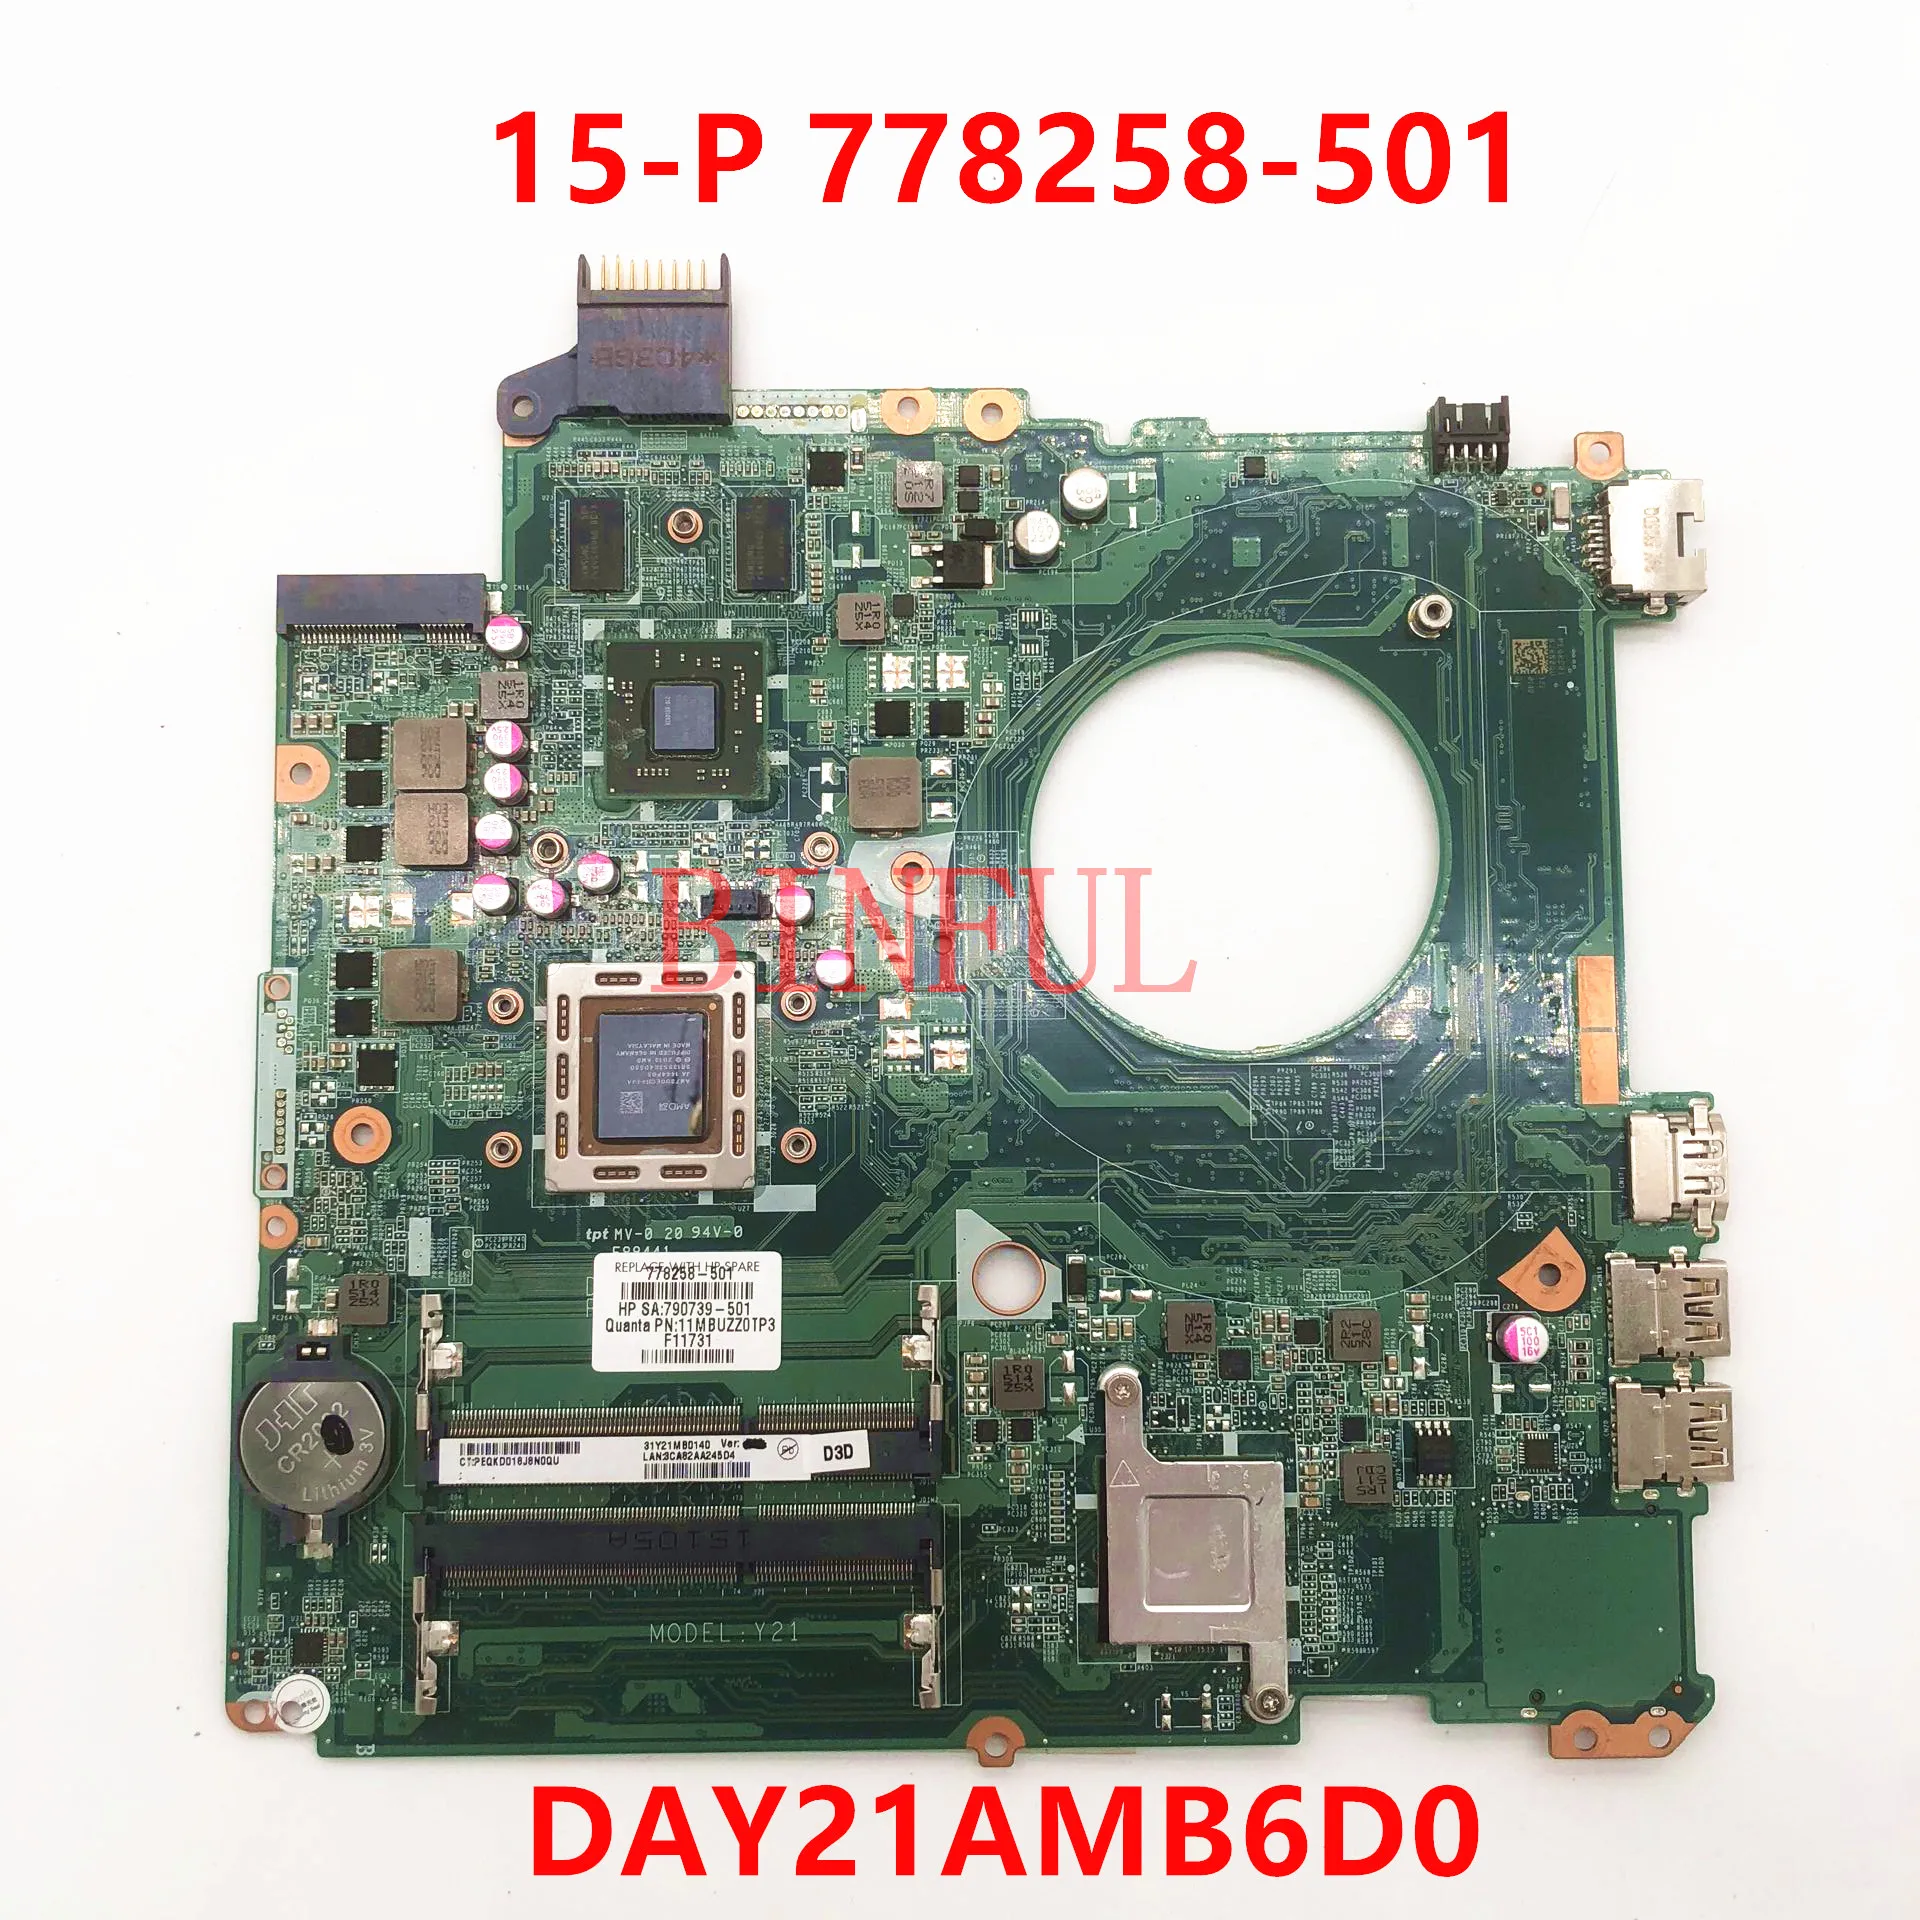 Laptop Motherboard For HP 15-P Laptop Motherboard 778258-501 778258-001 778258-601 DAY21AMB6D0 M260 A10-7300M 2G 100%Full Tested